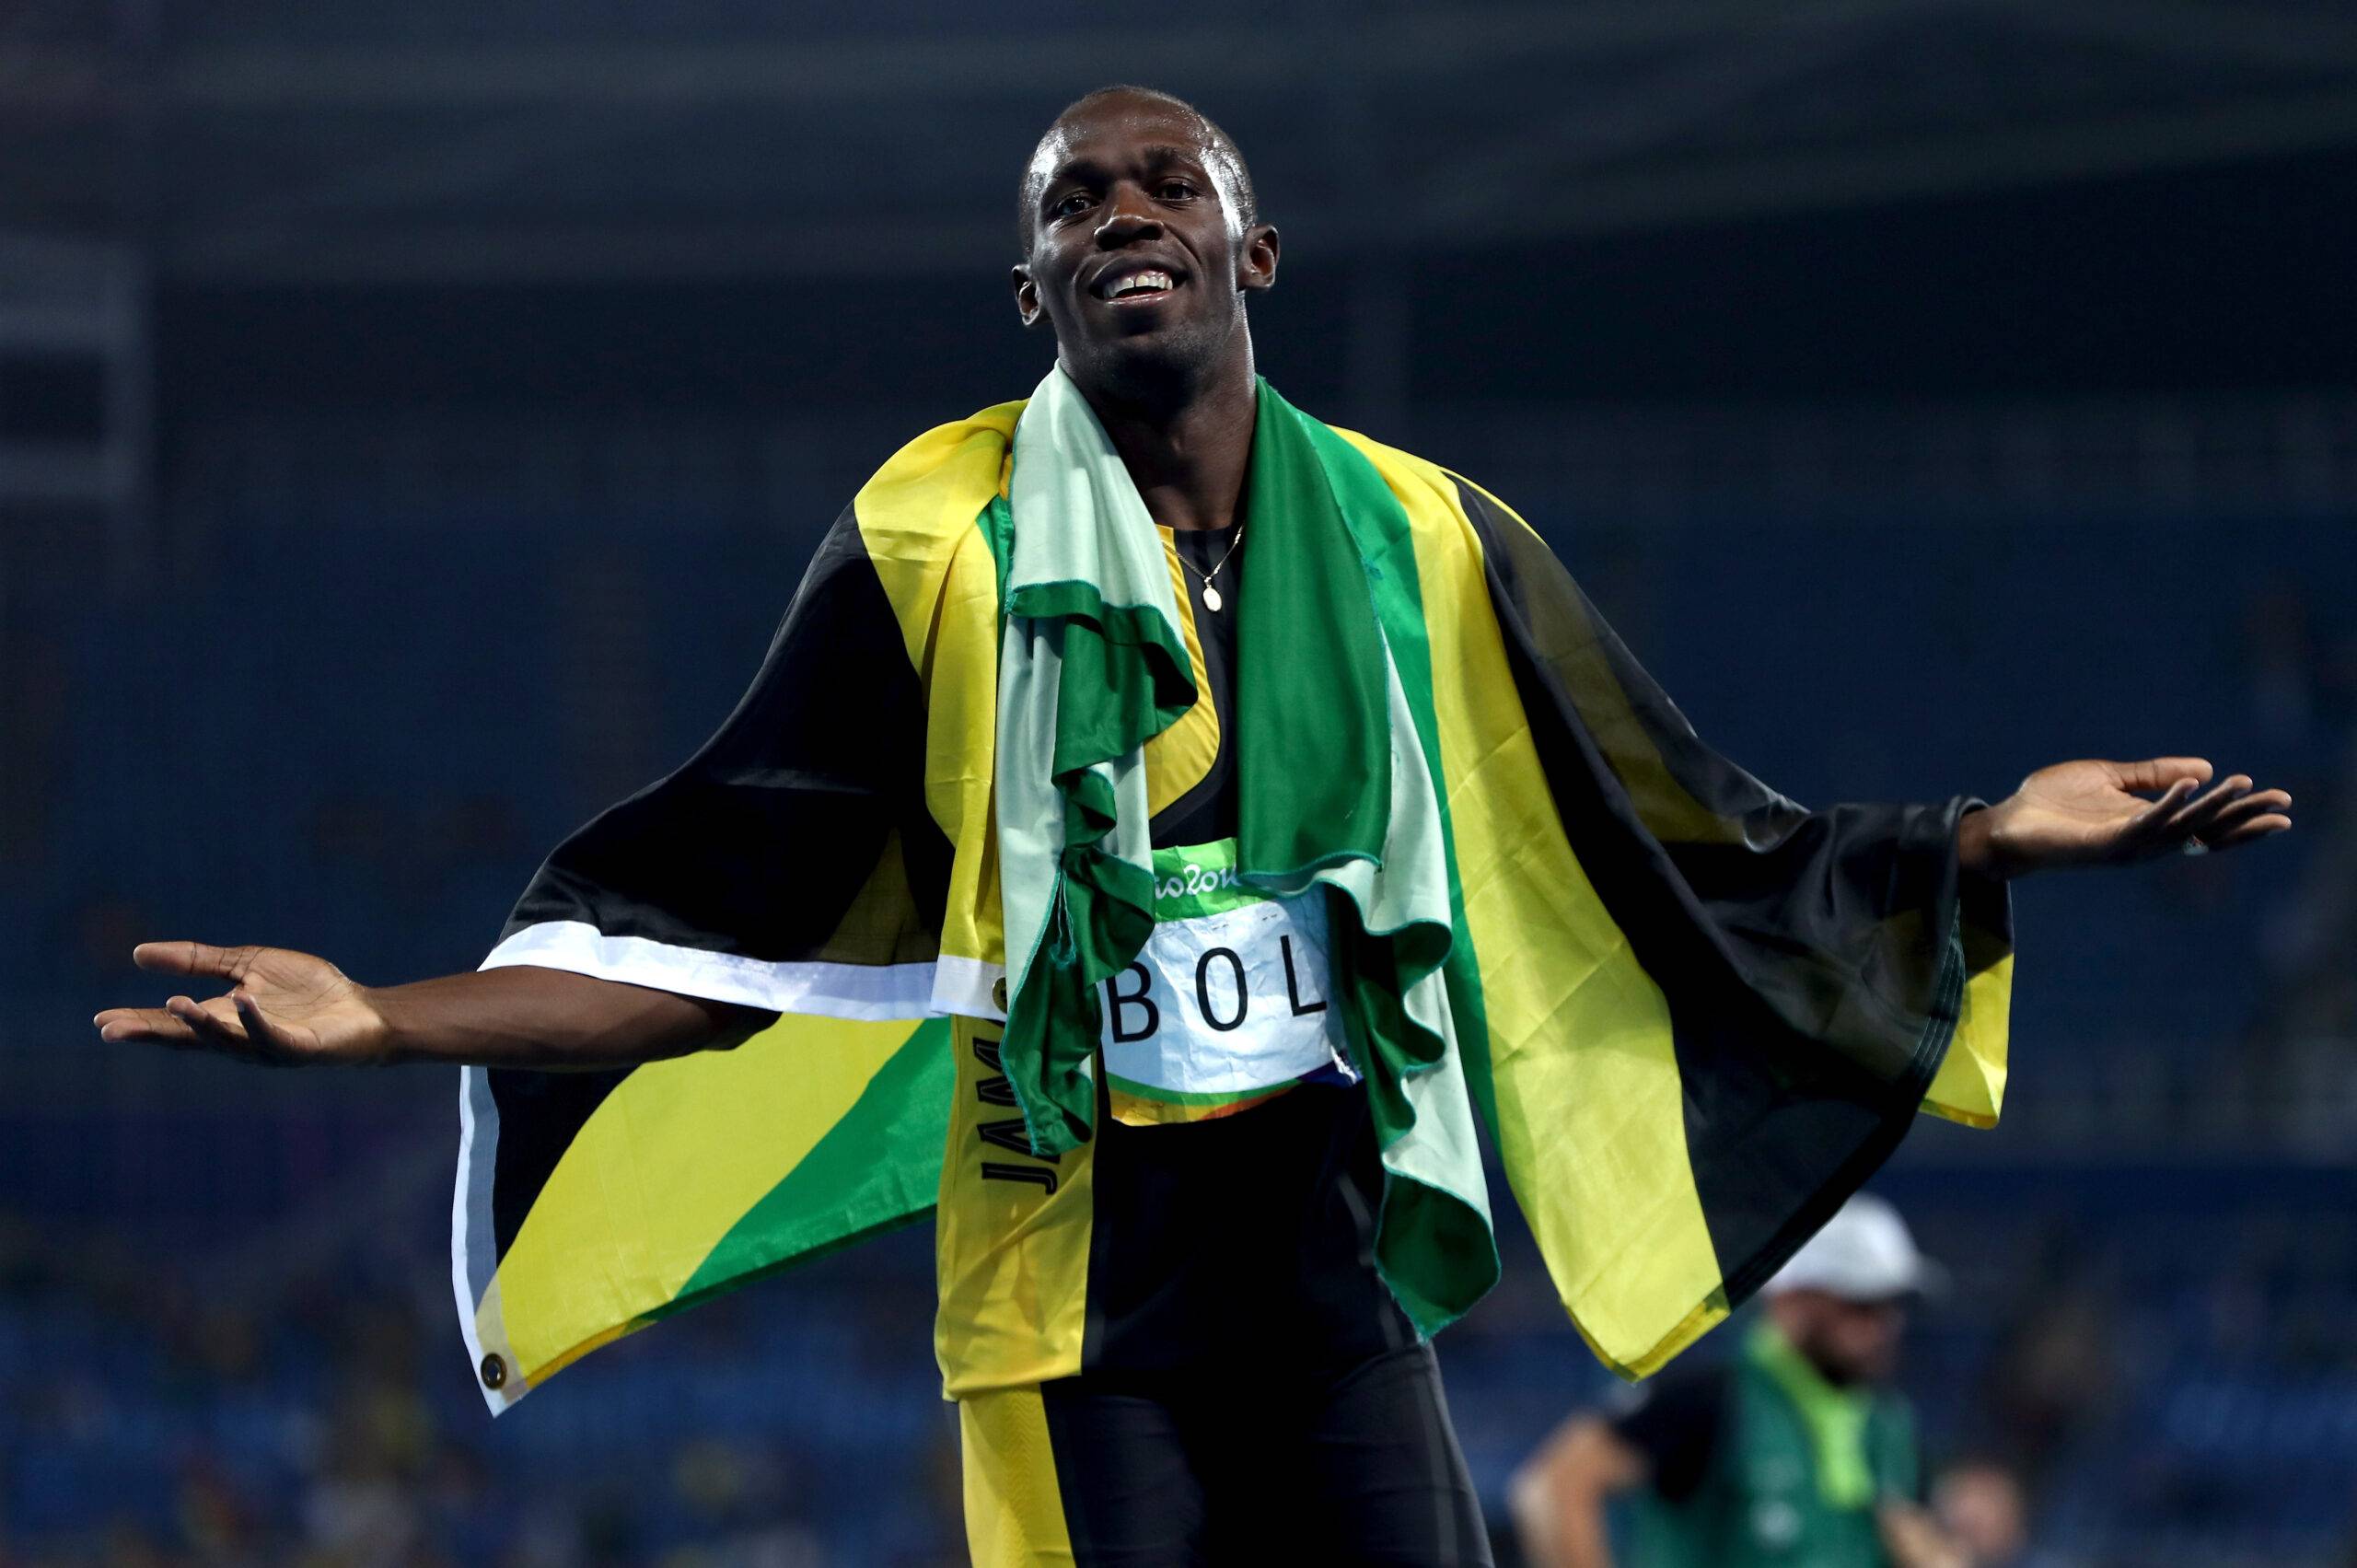 Usain Bolt celebrates during the 2016 Olympic Games